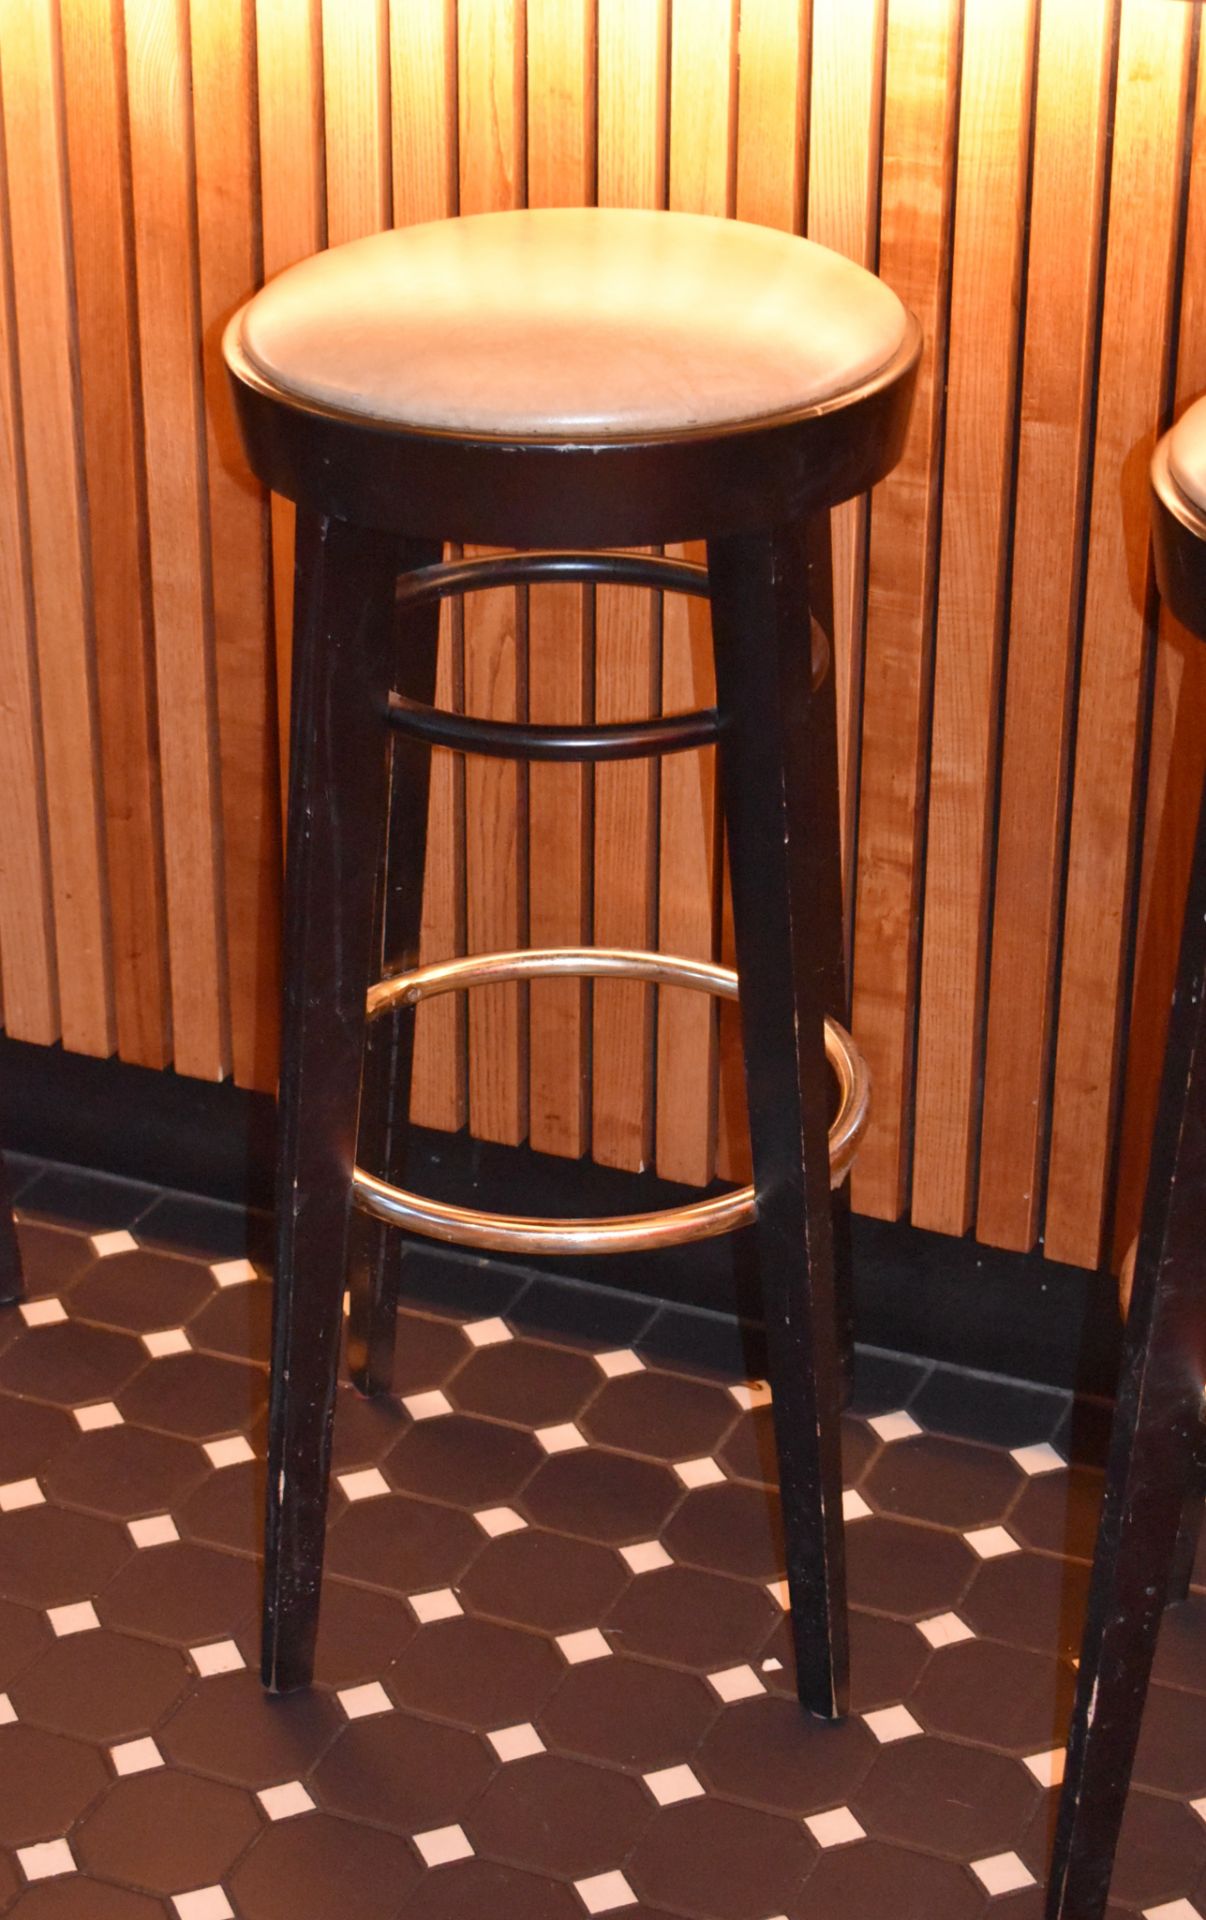 4 x Bar Stools in Black With Cushioned Seats and Foot Rests - H105 x W75 cms - CL470 - Location: - Image 3 of 3